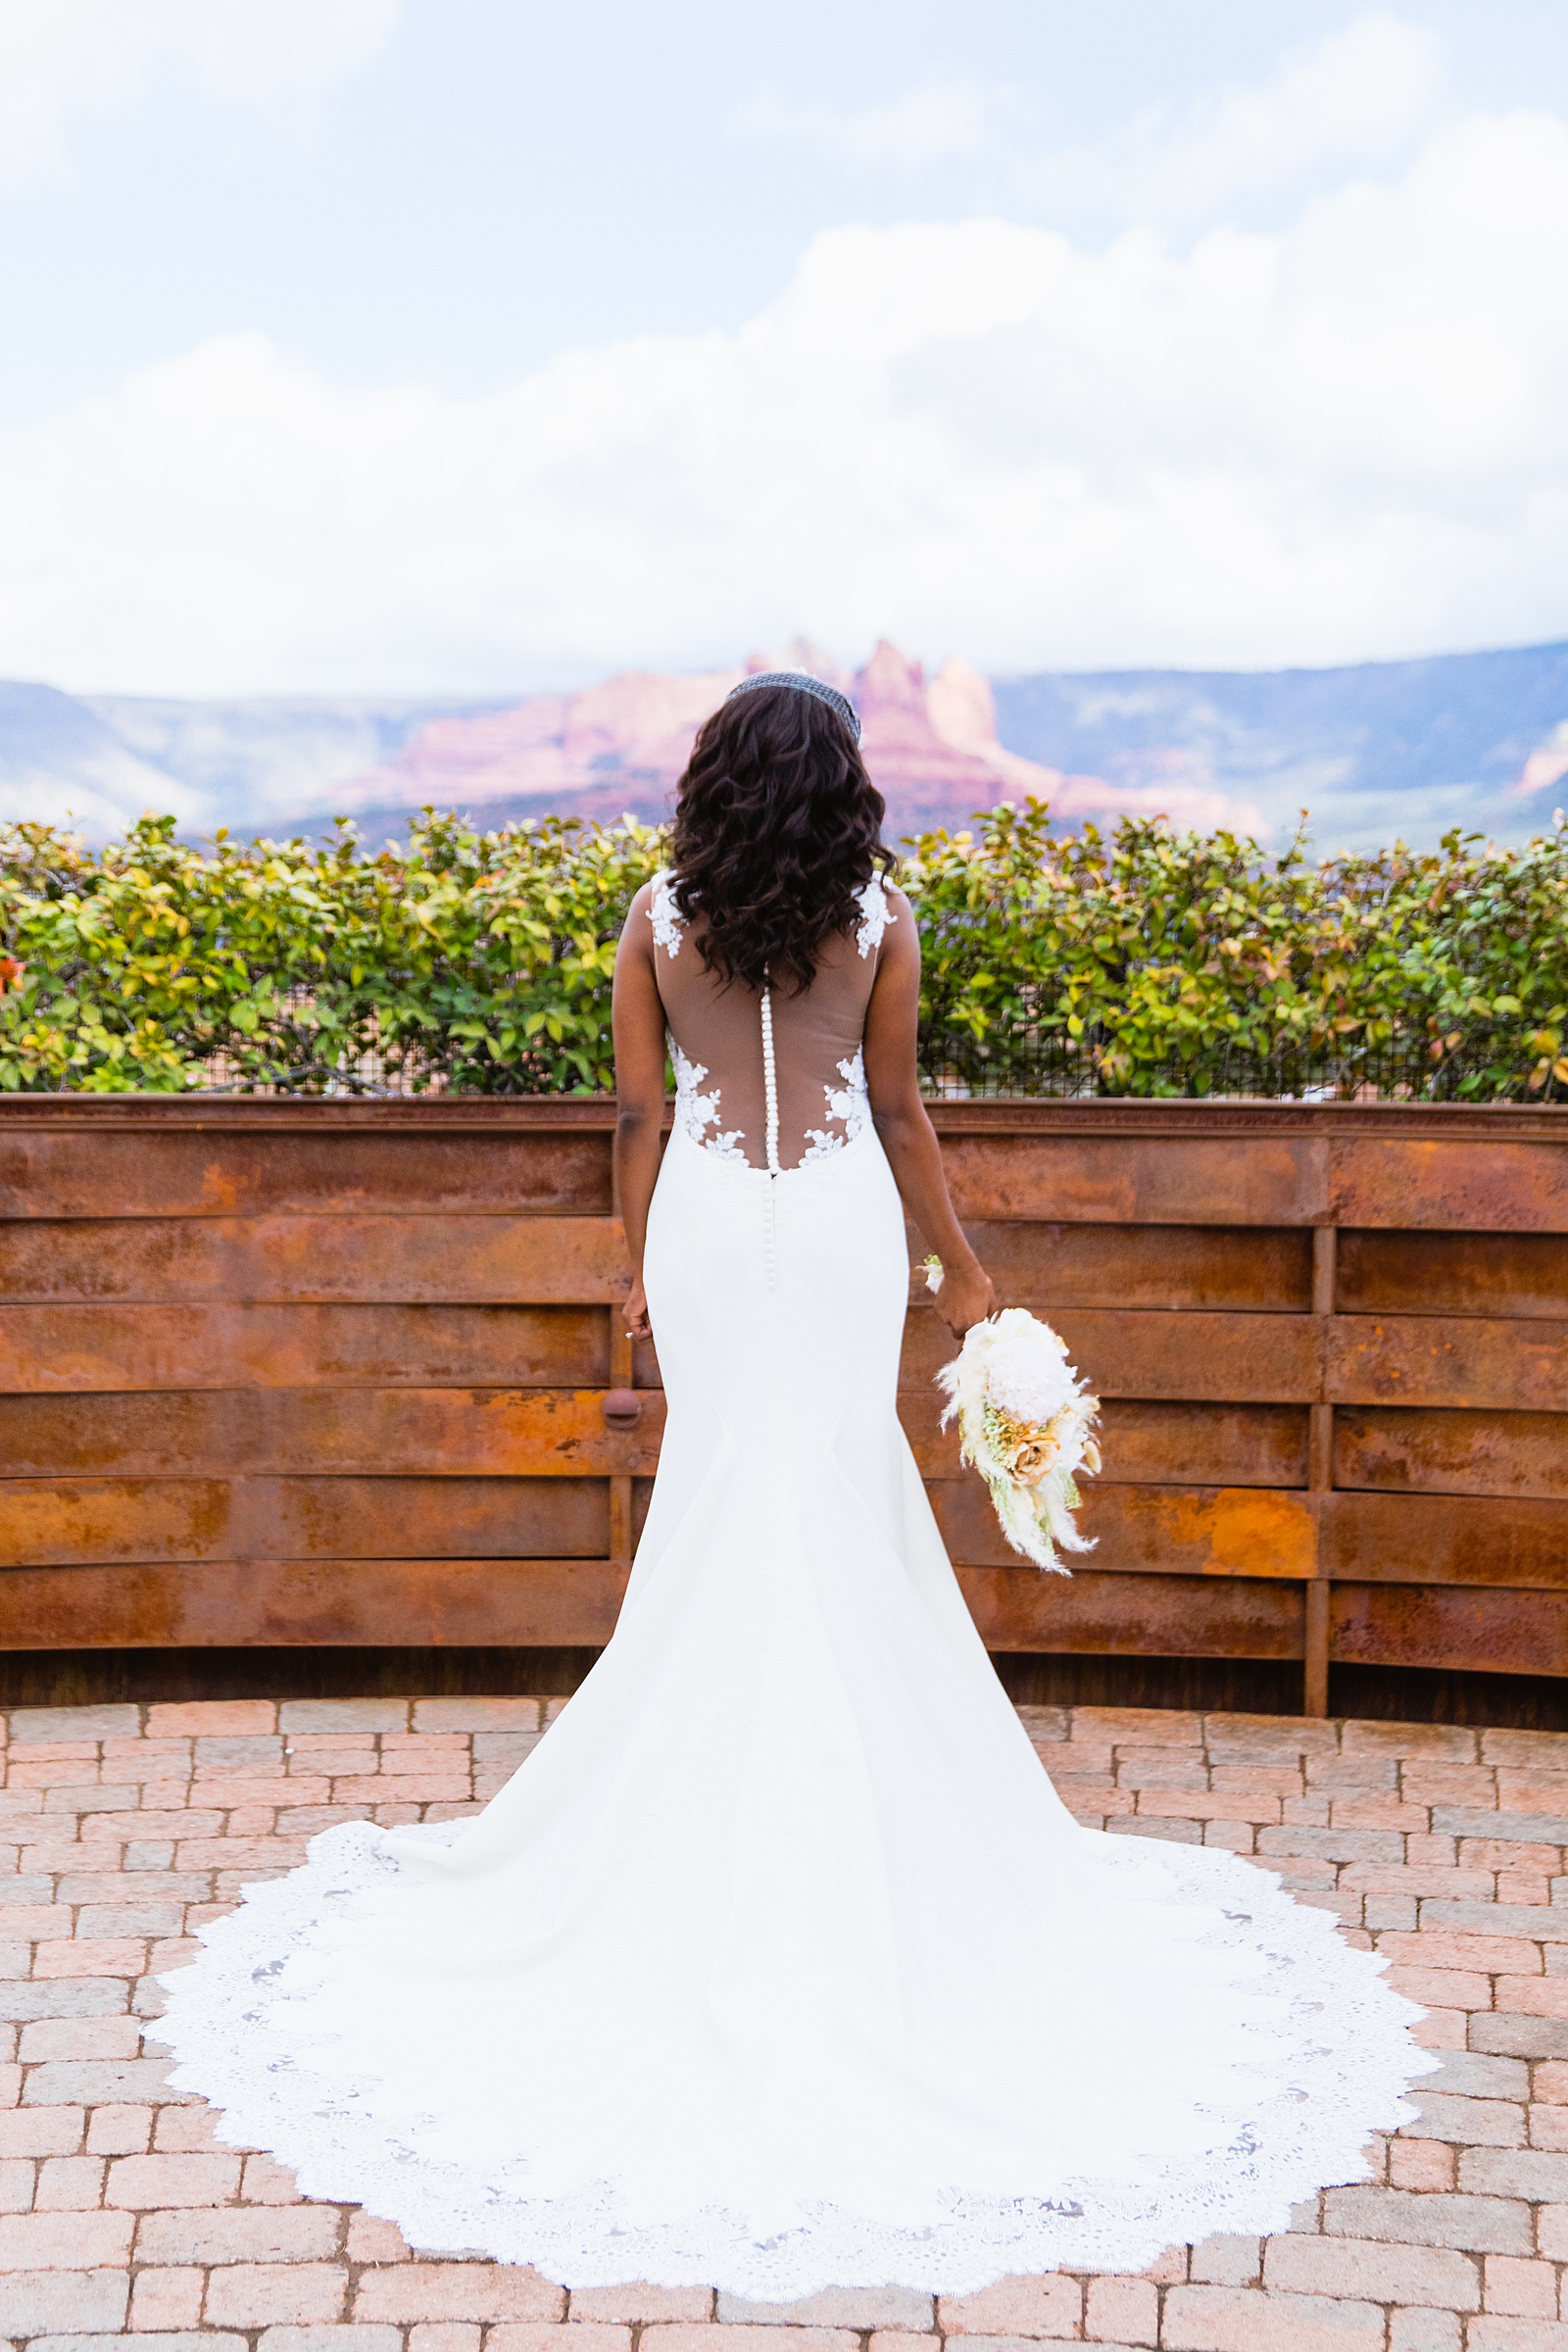 Bride's classic white and romantic wedding dress for her Agave of Sedona wedding by PMA Photography.